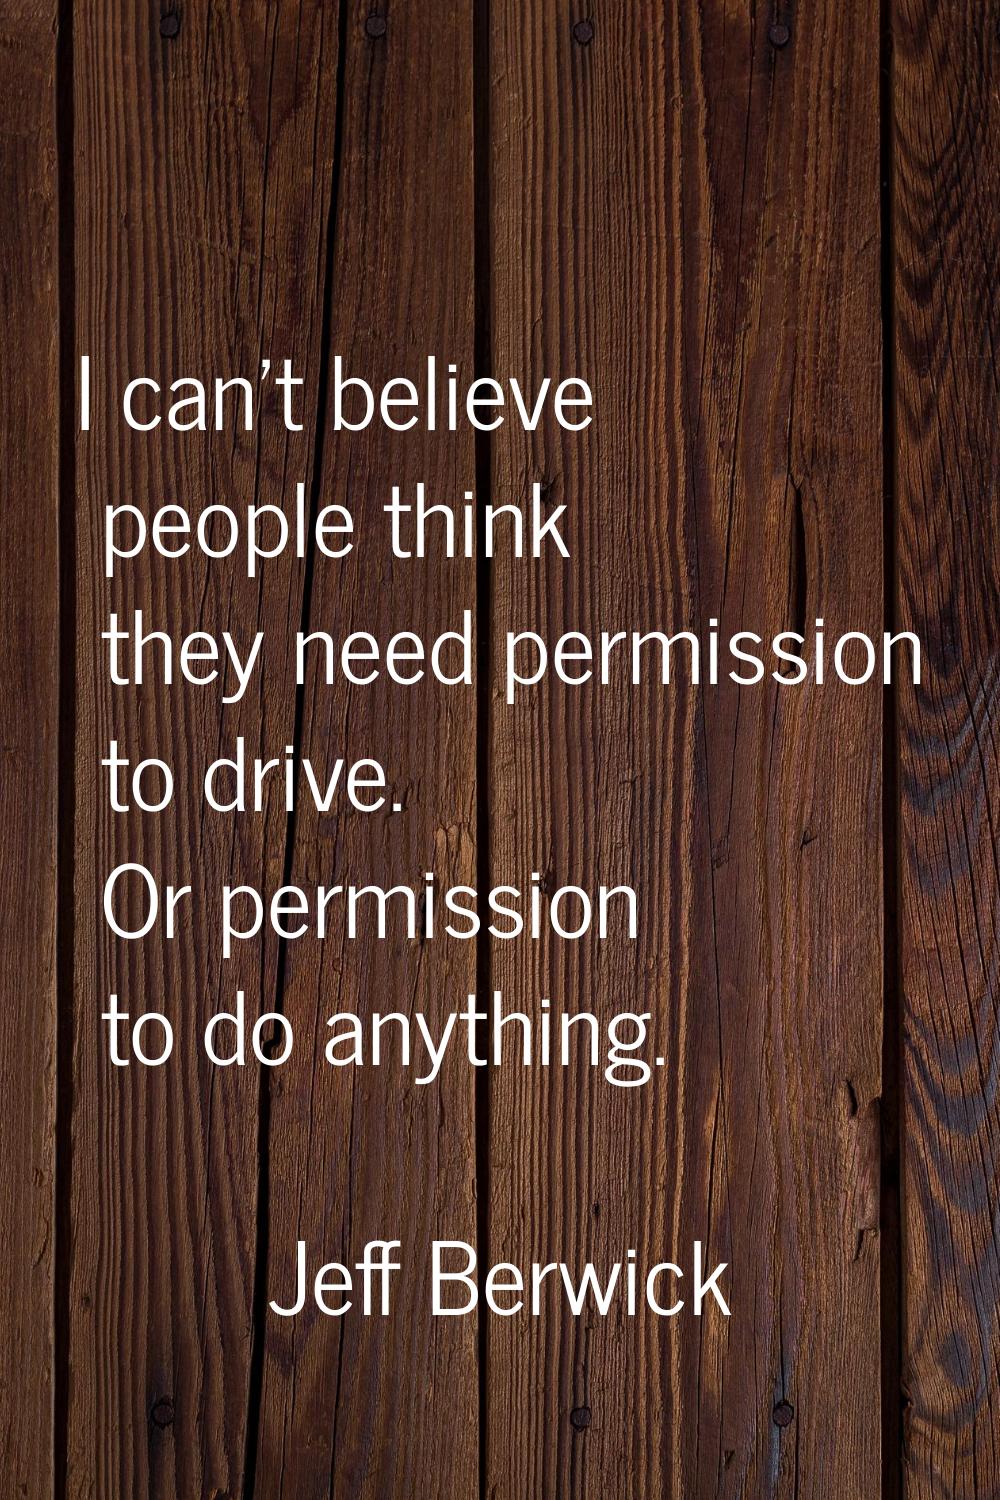 I can't believe people think they need permission to drive. Or permission to do anything.